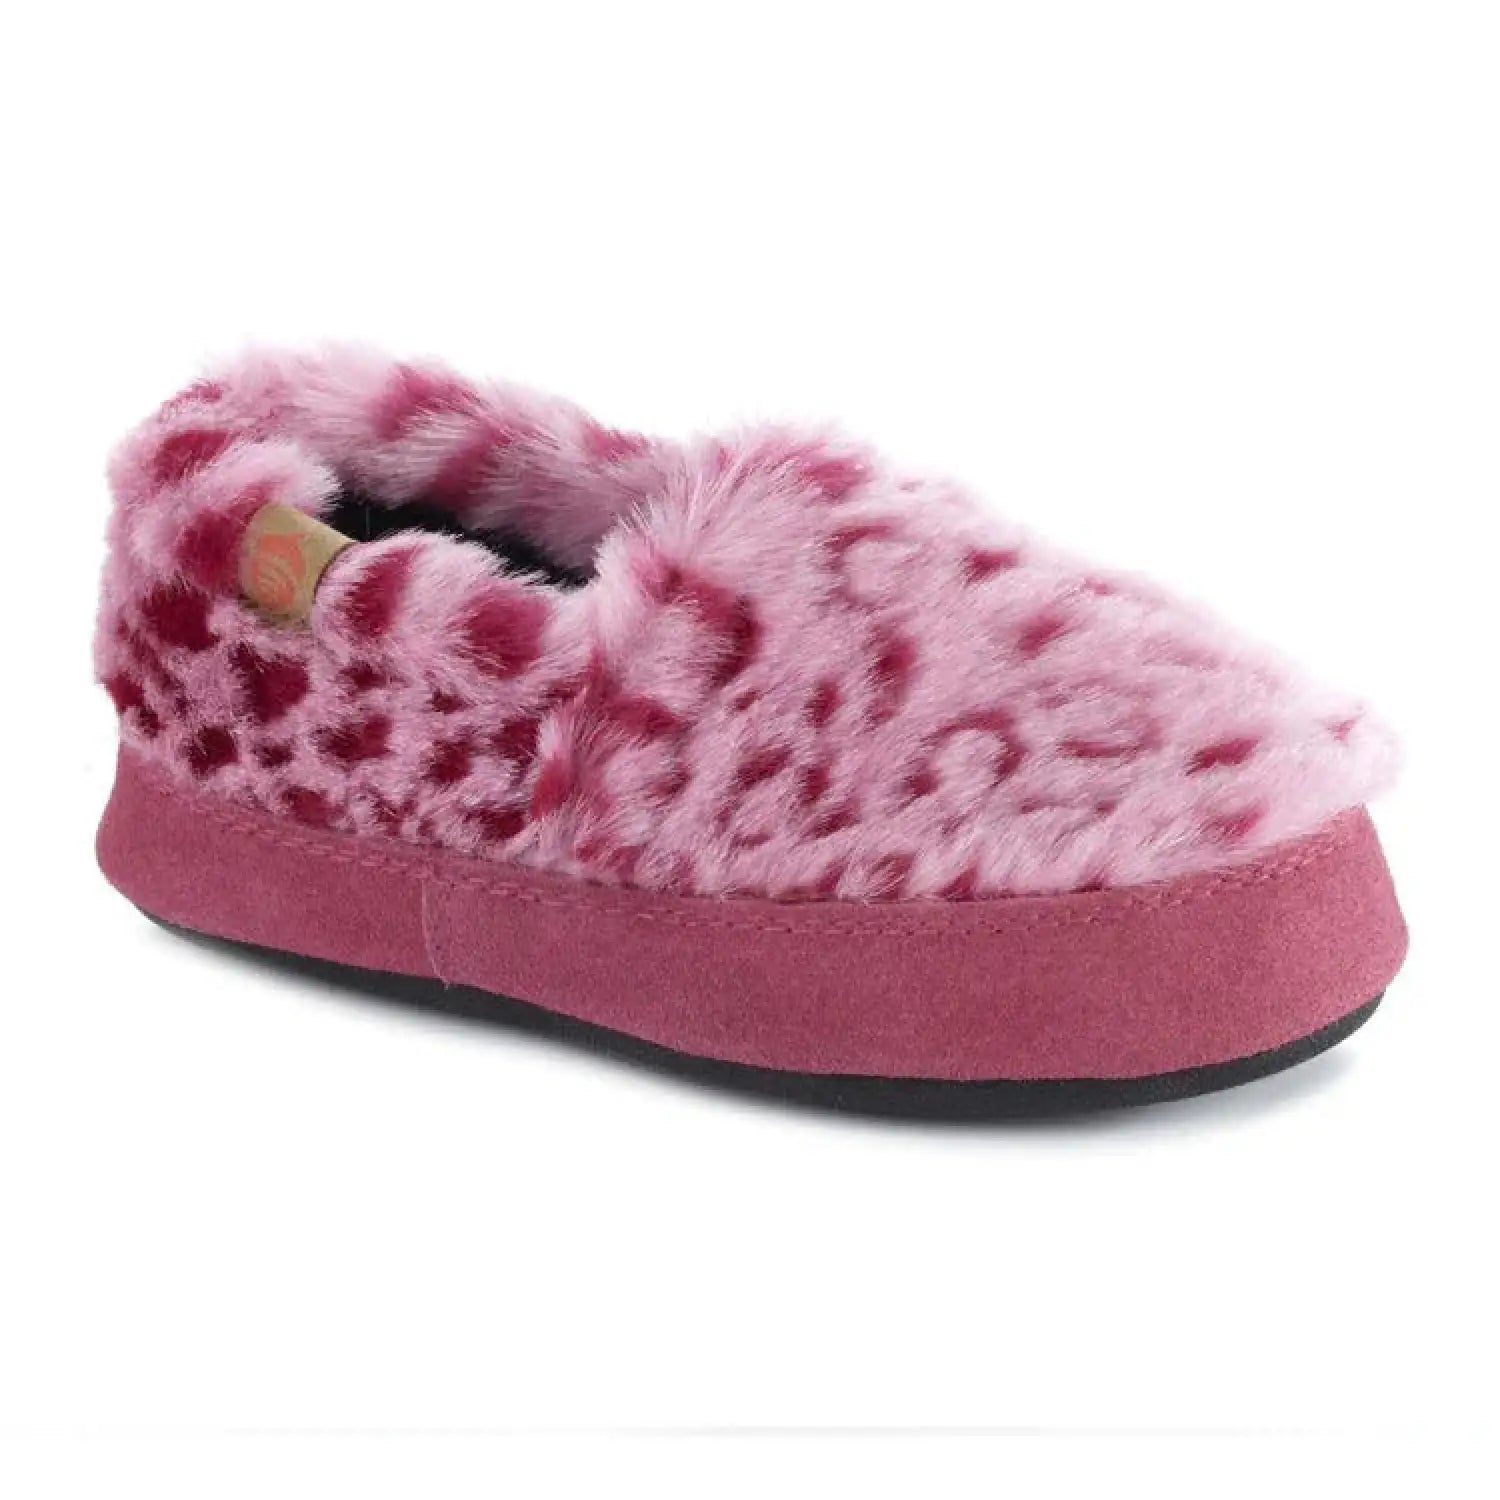 Light and dark pink patterned fuzzy slipper with rubber sole